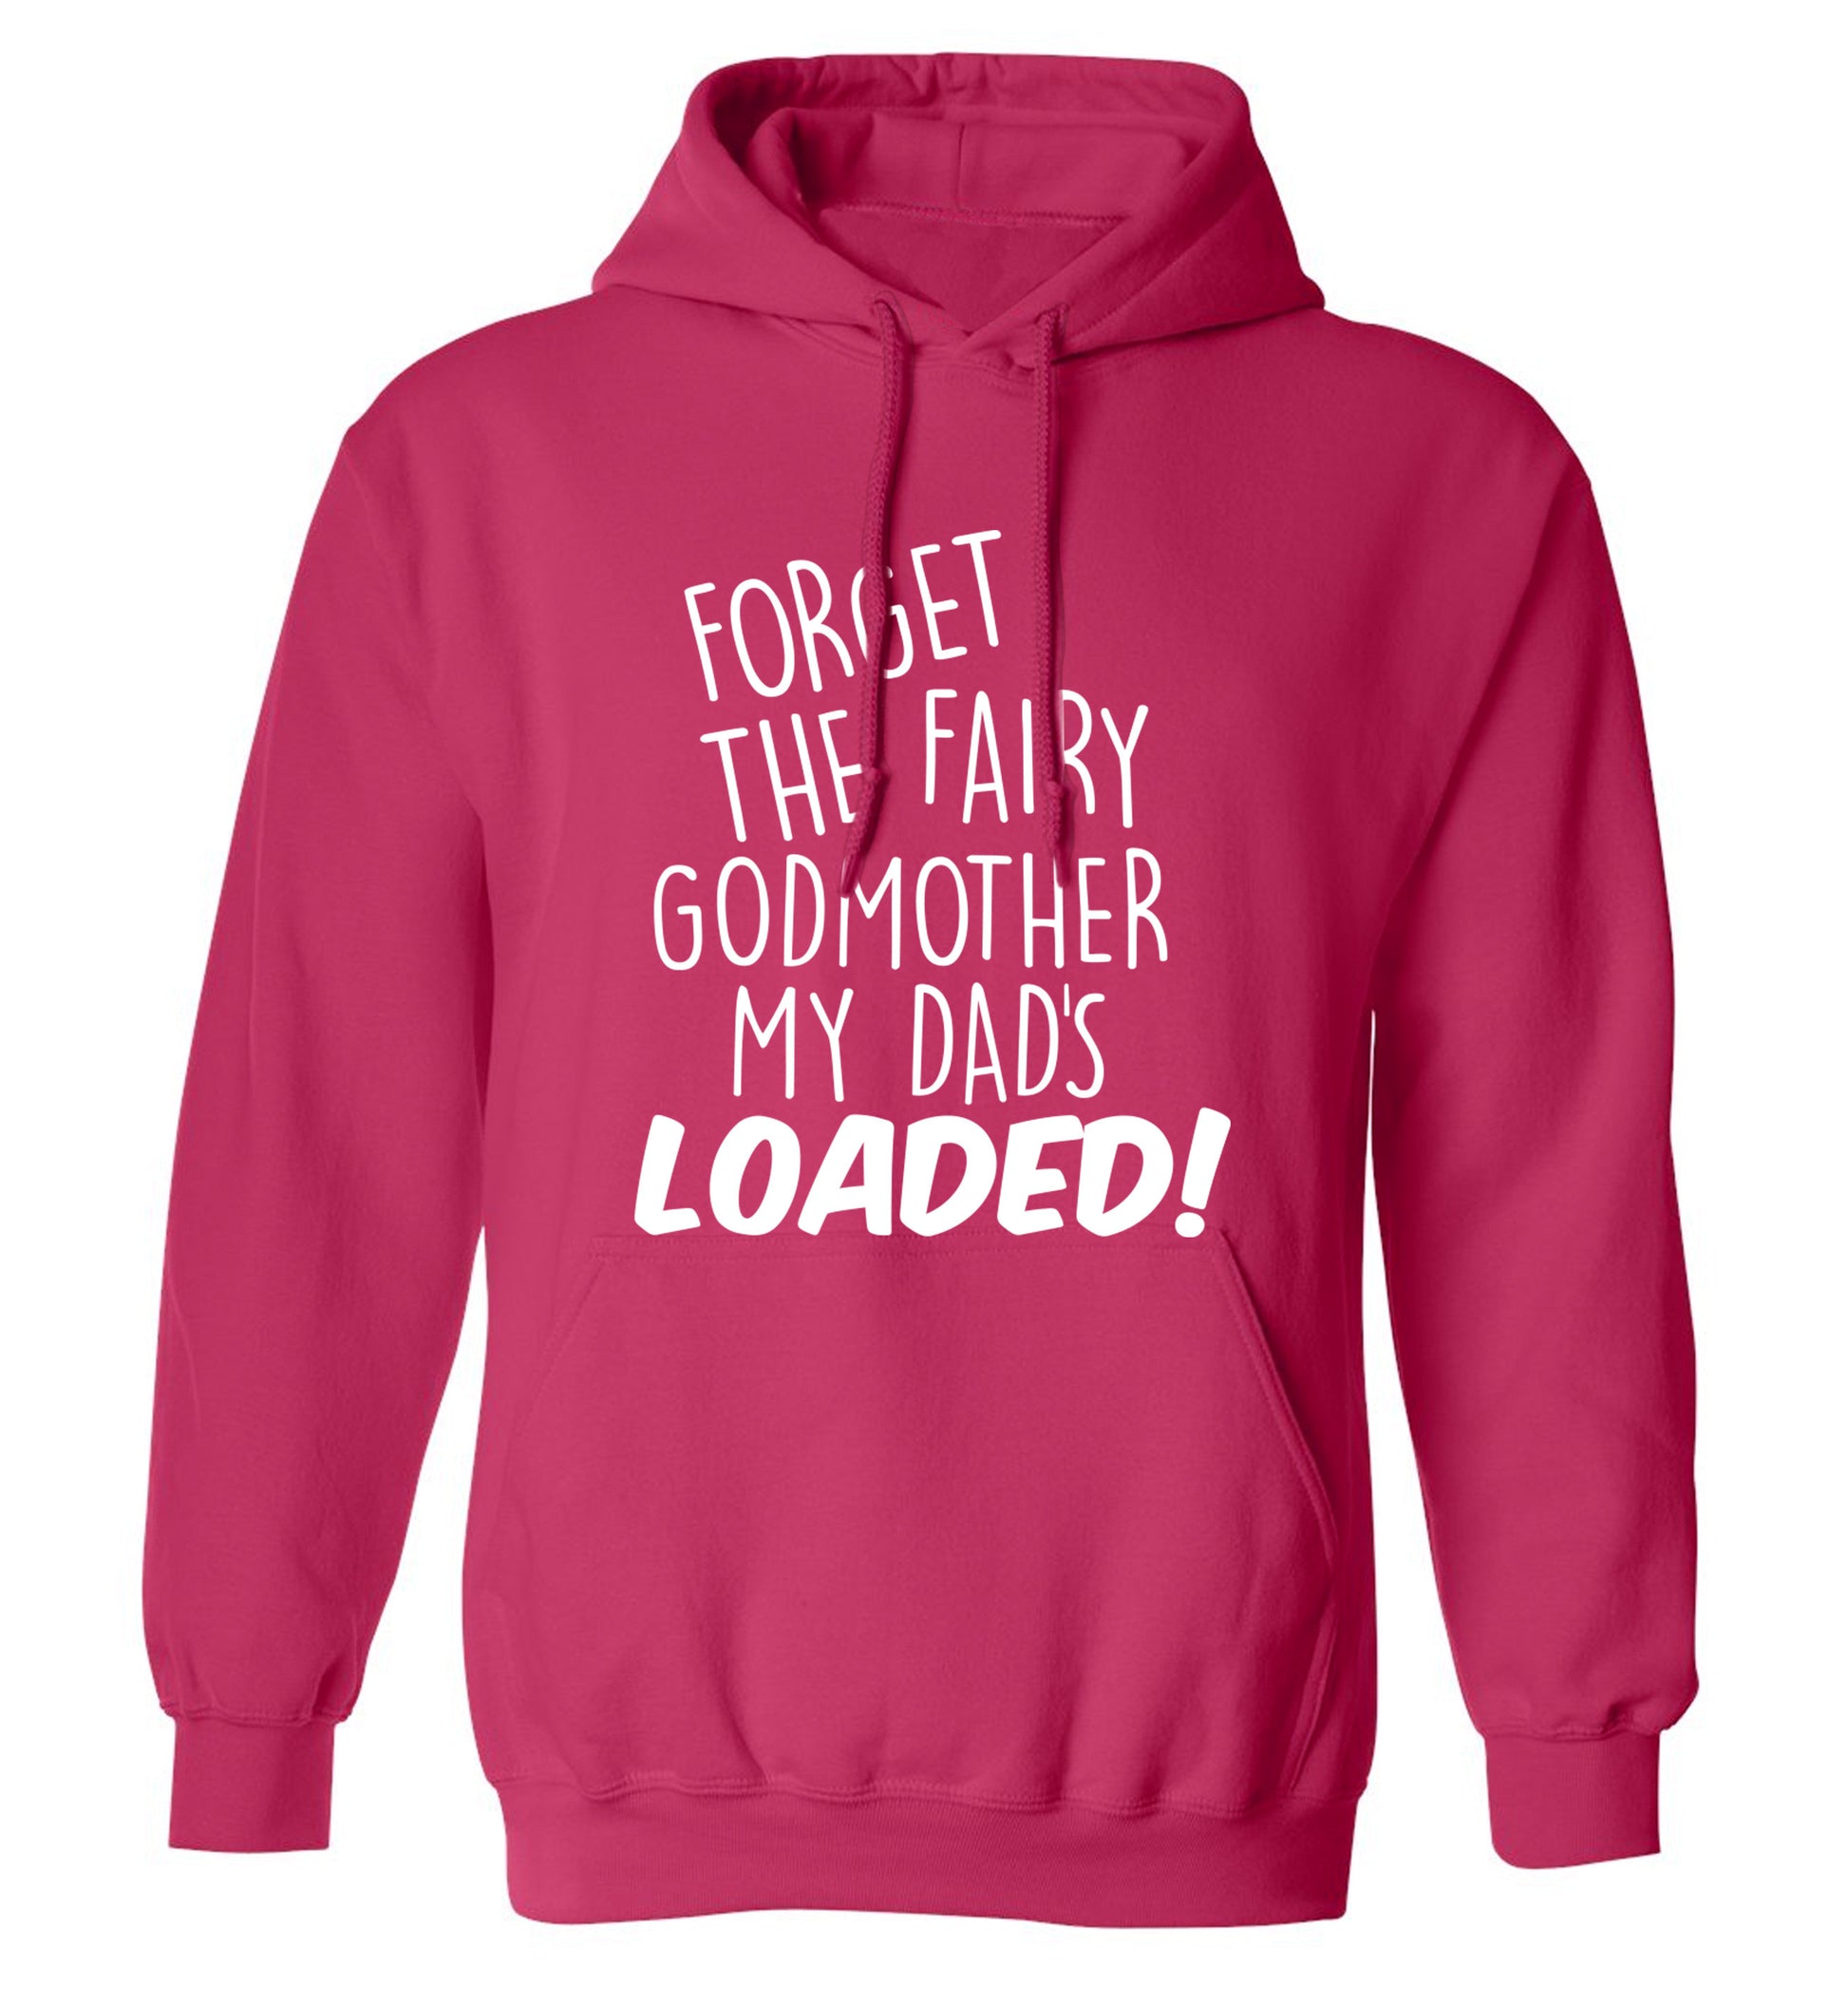 Forget the fairy godmother my dad's loaded adults unisex pink hoodie 2XL